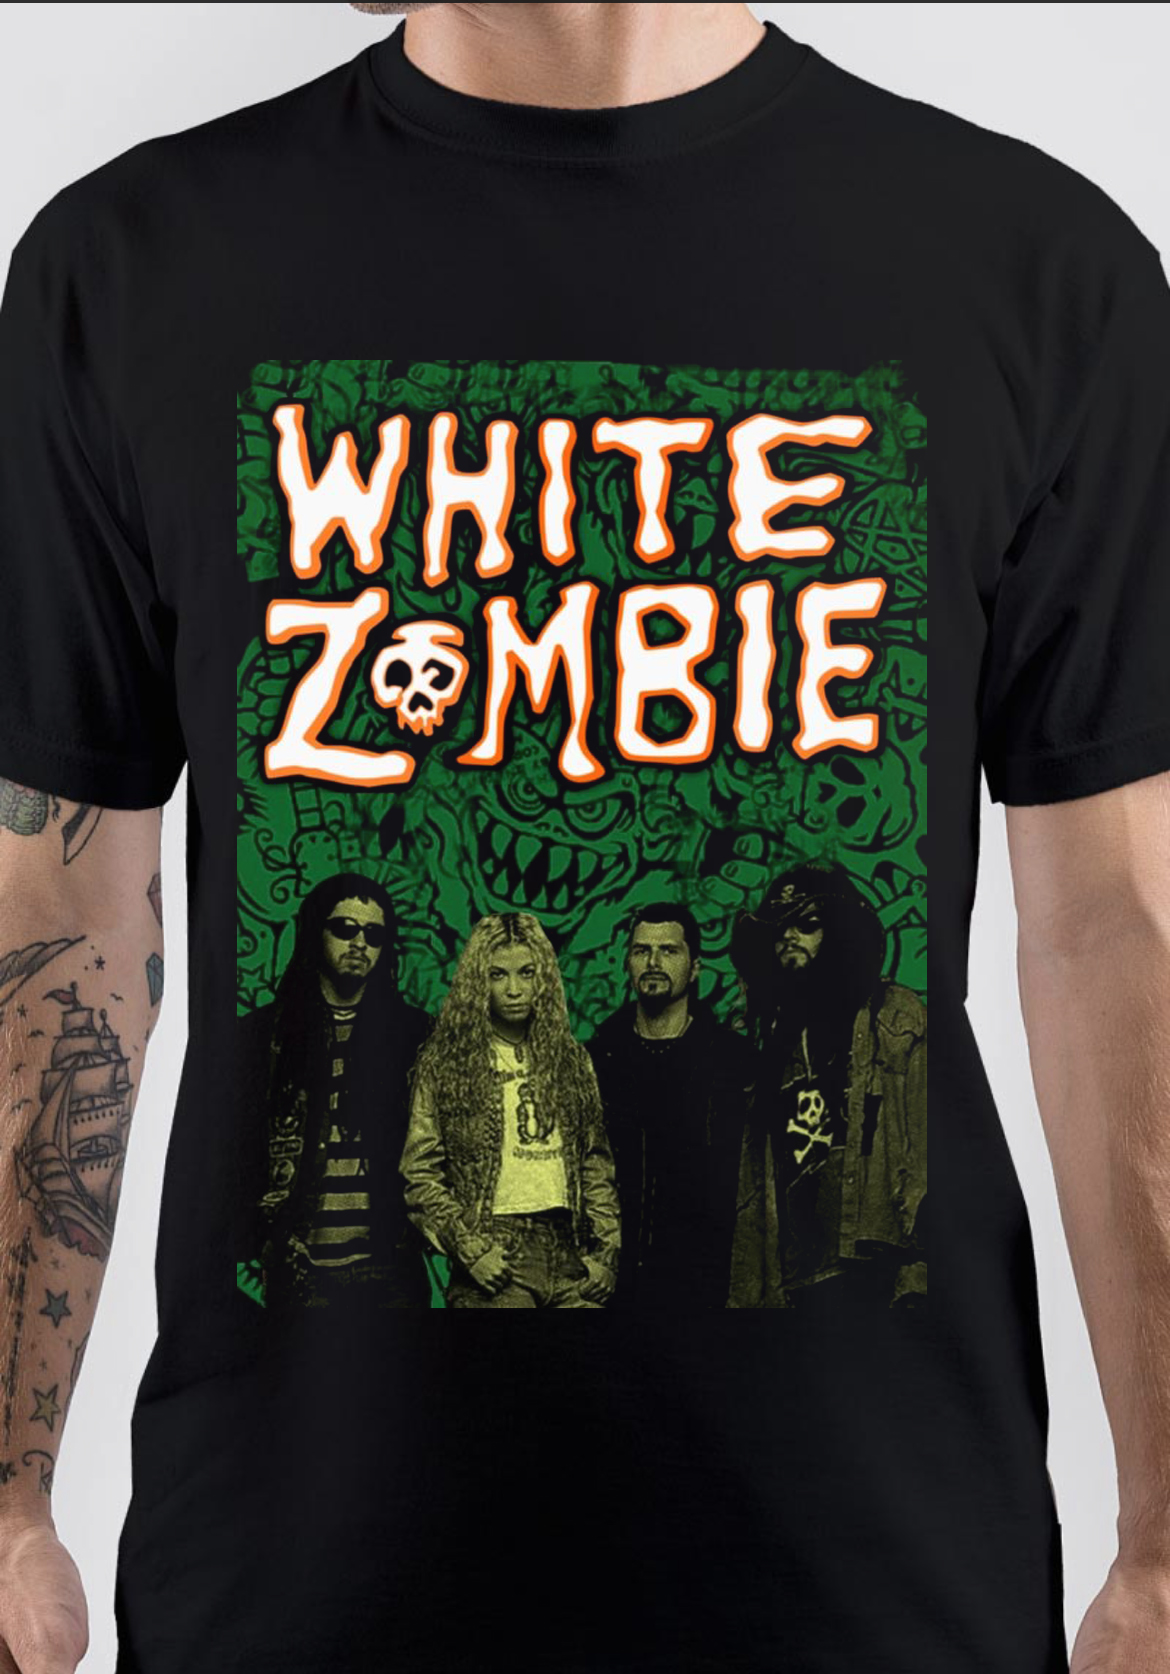 White Zombie Band T-Shirt And Merchandise